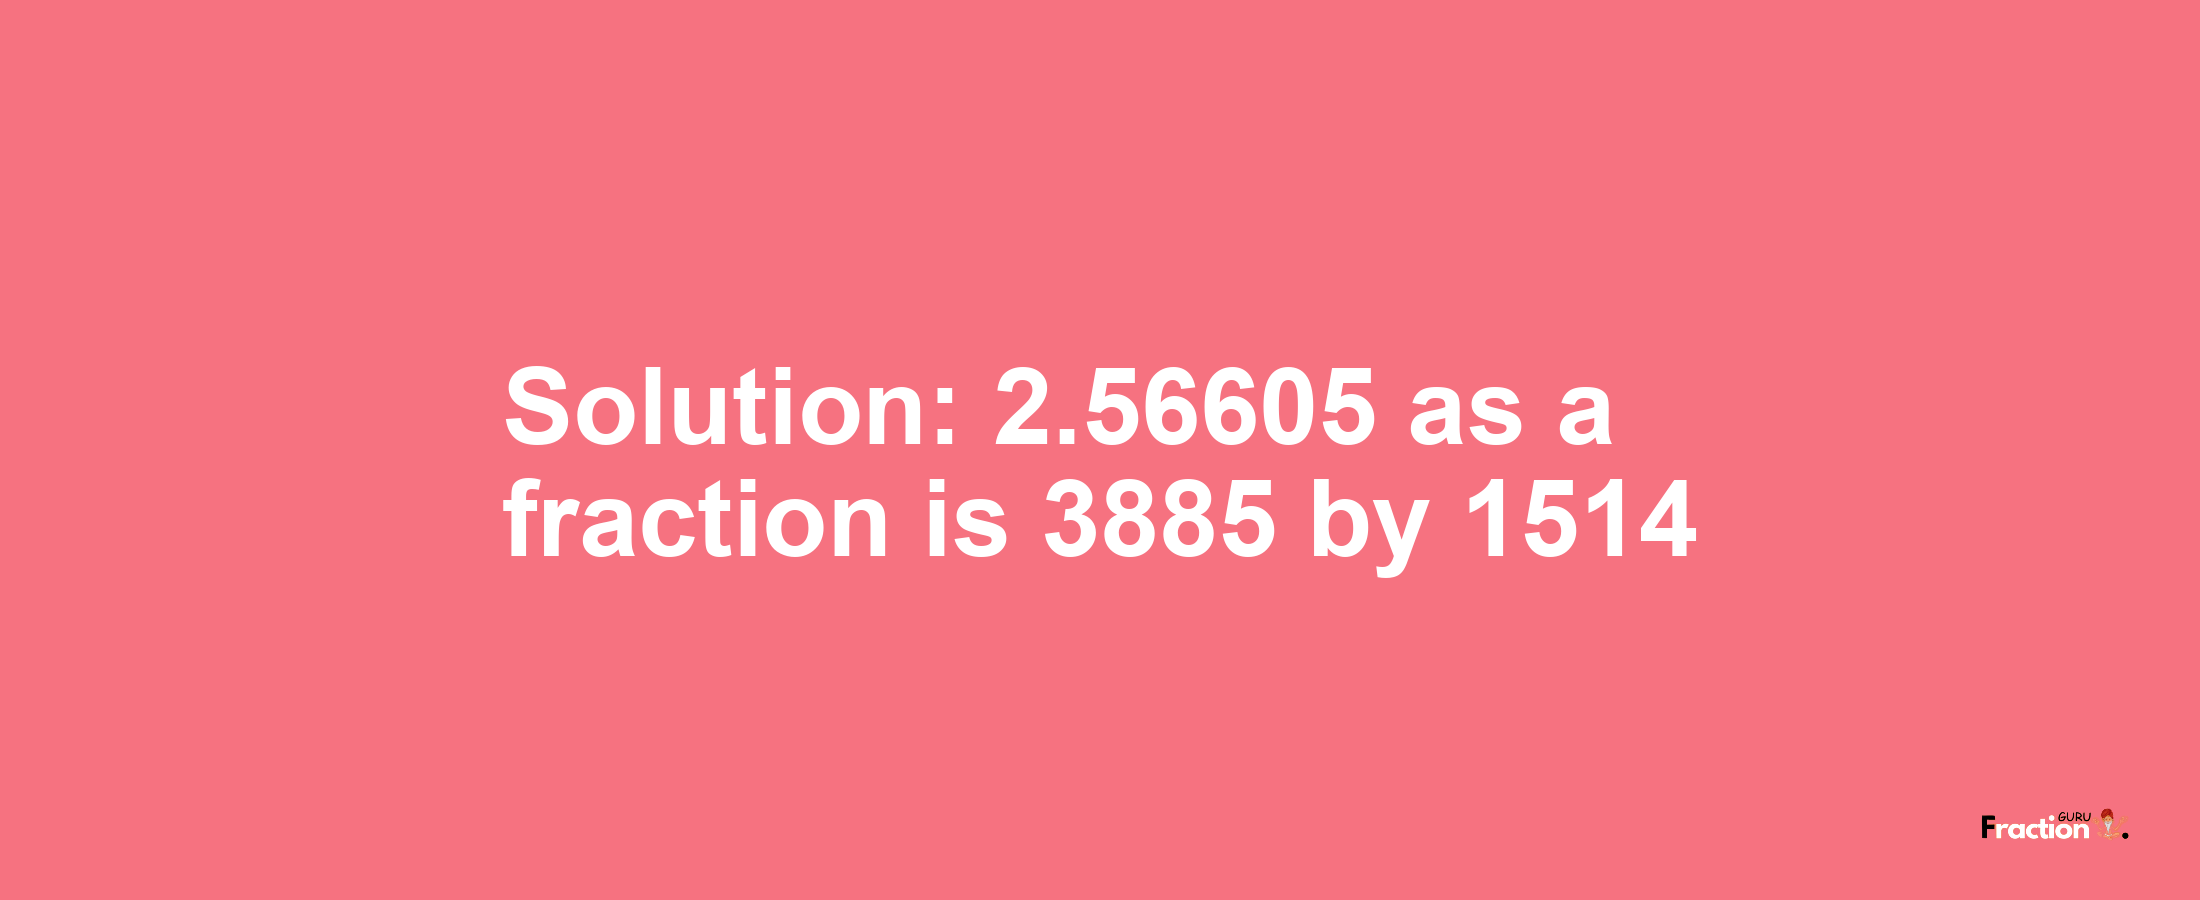 Solution:2.56605 as a fraction is 3885/1514